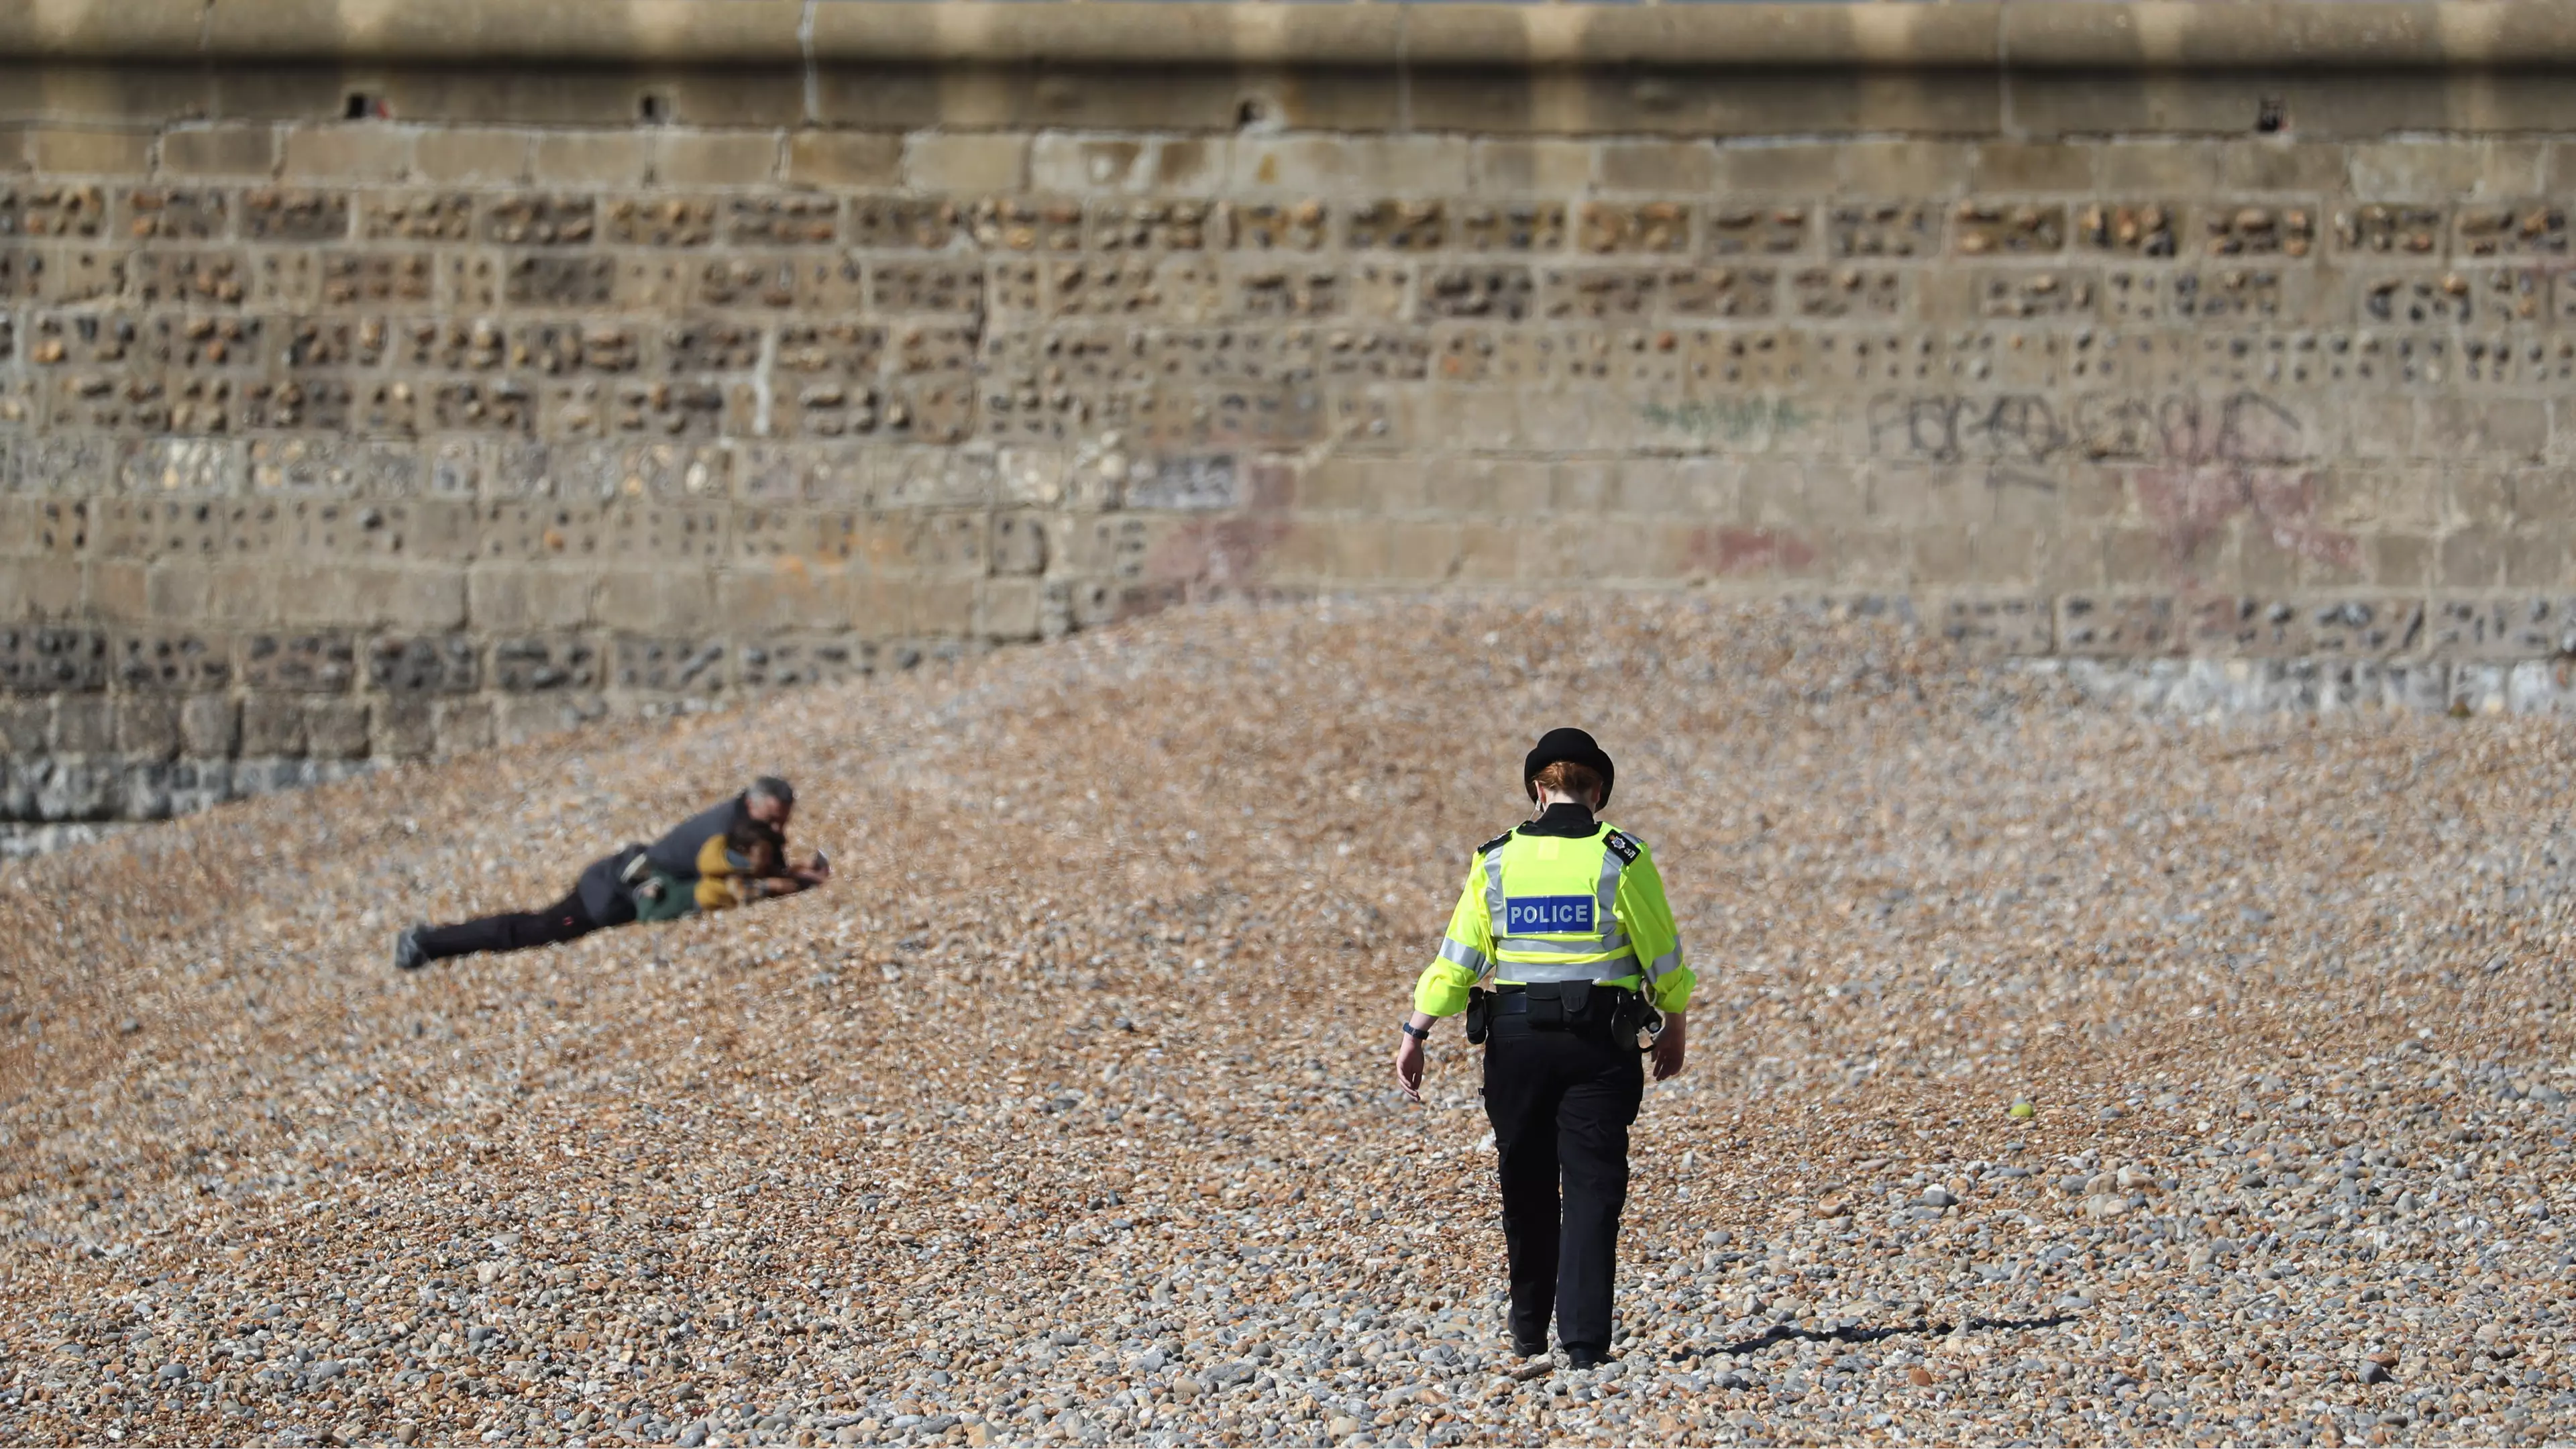 Police And Military Boats To Patrol Beaches As Brits Flout Lockdown Rules